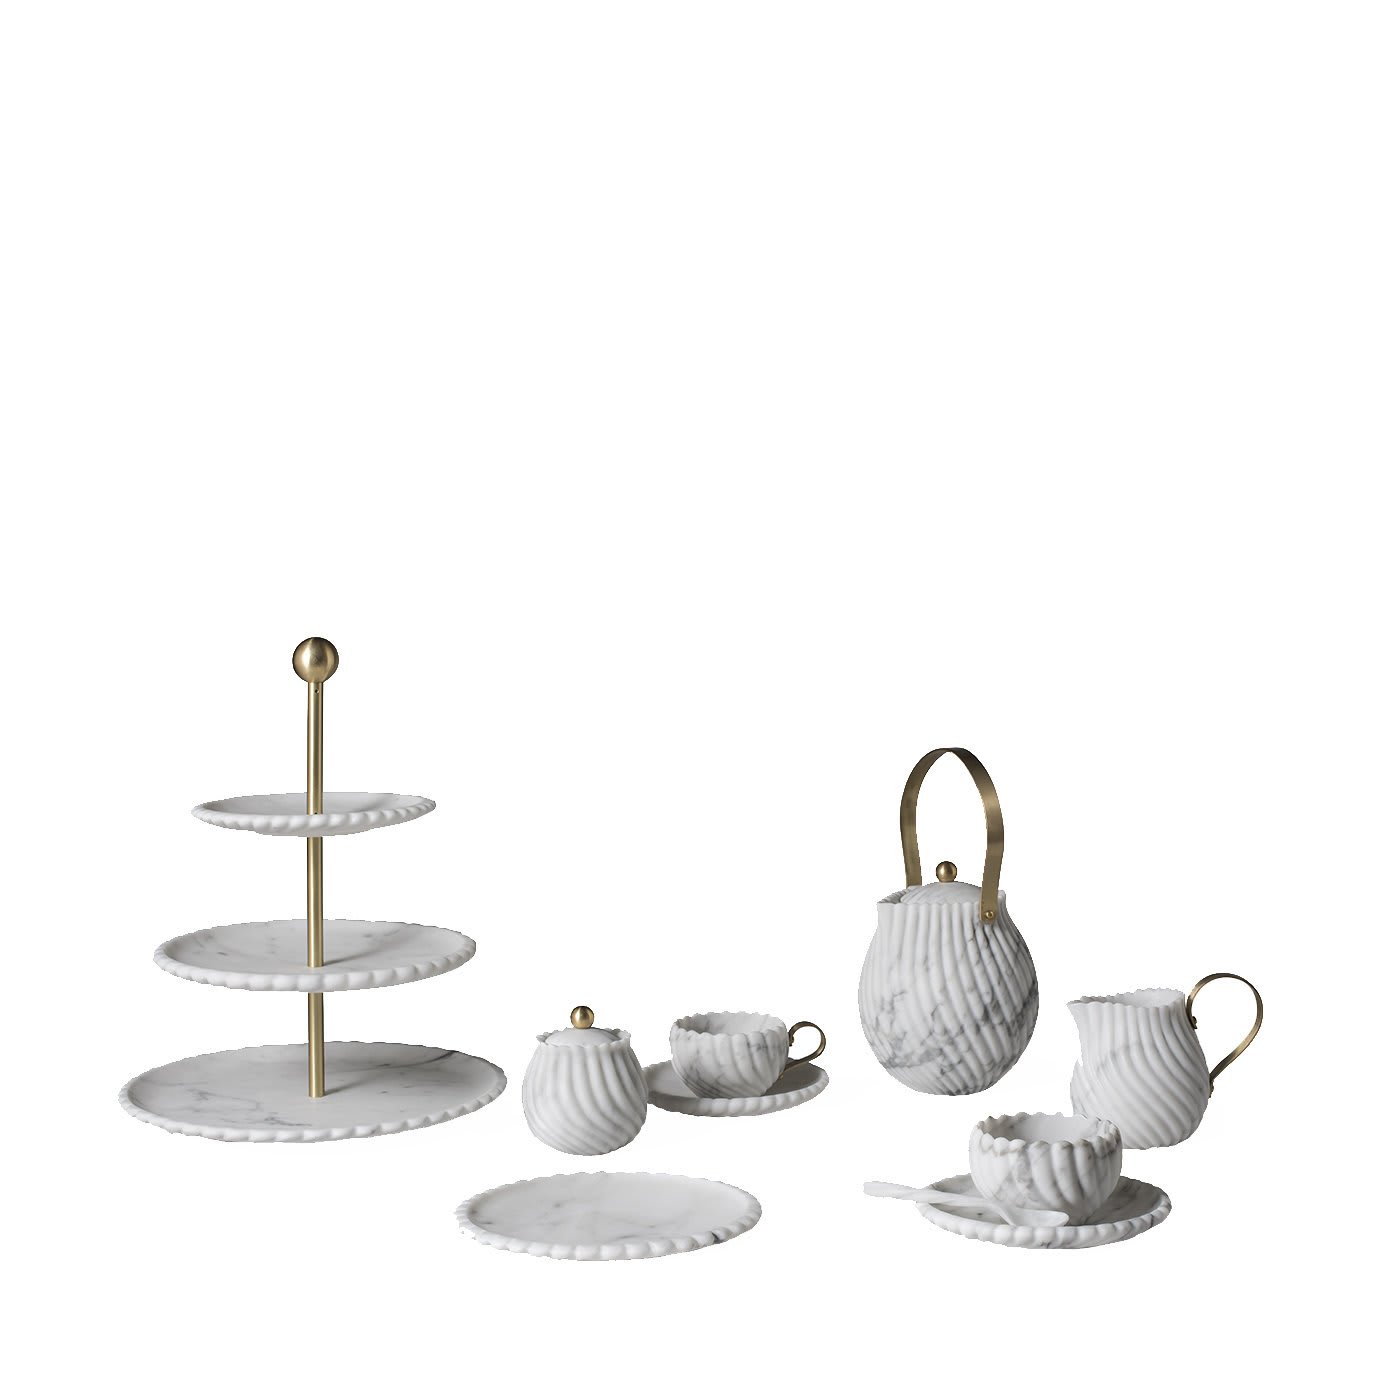 Victoria Teacup and Saucer Set by Bethan Gray - Editions Milano